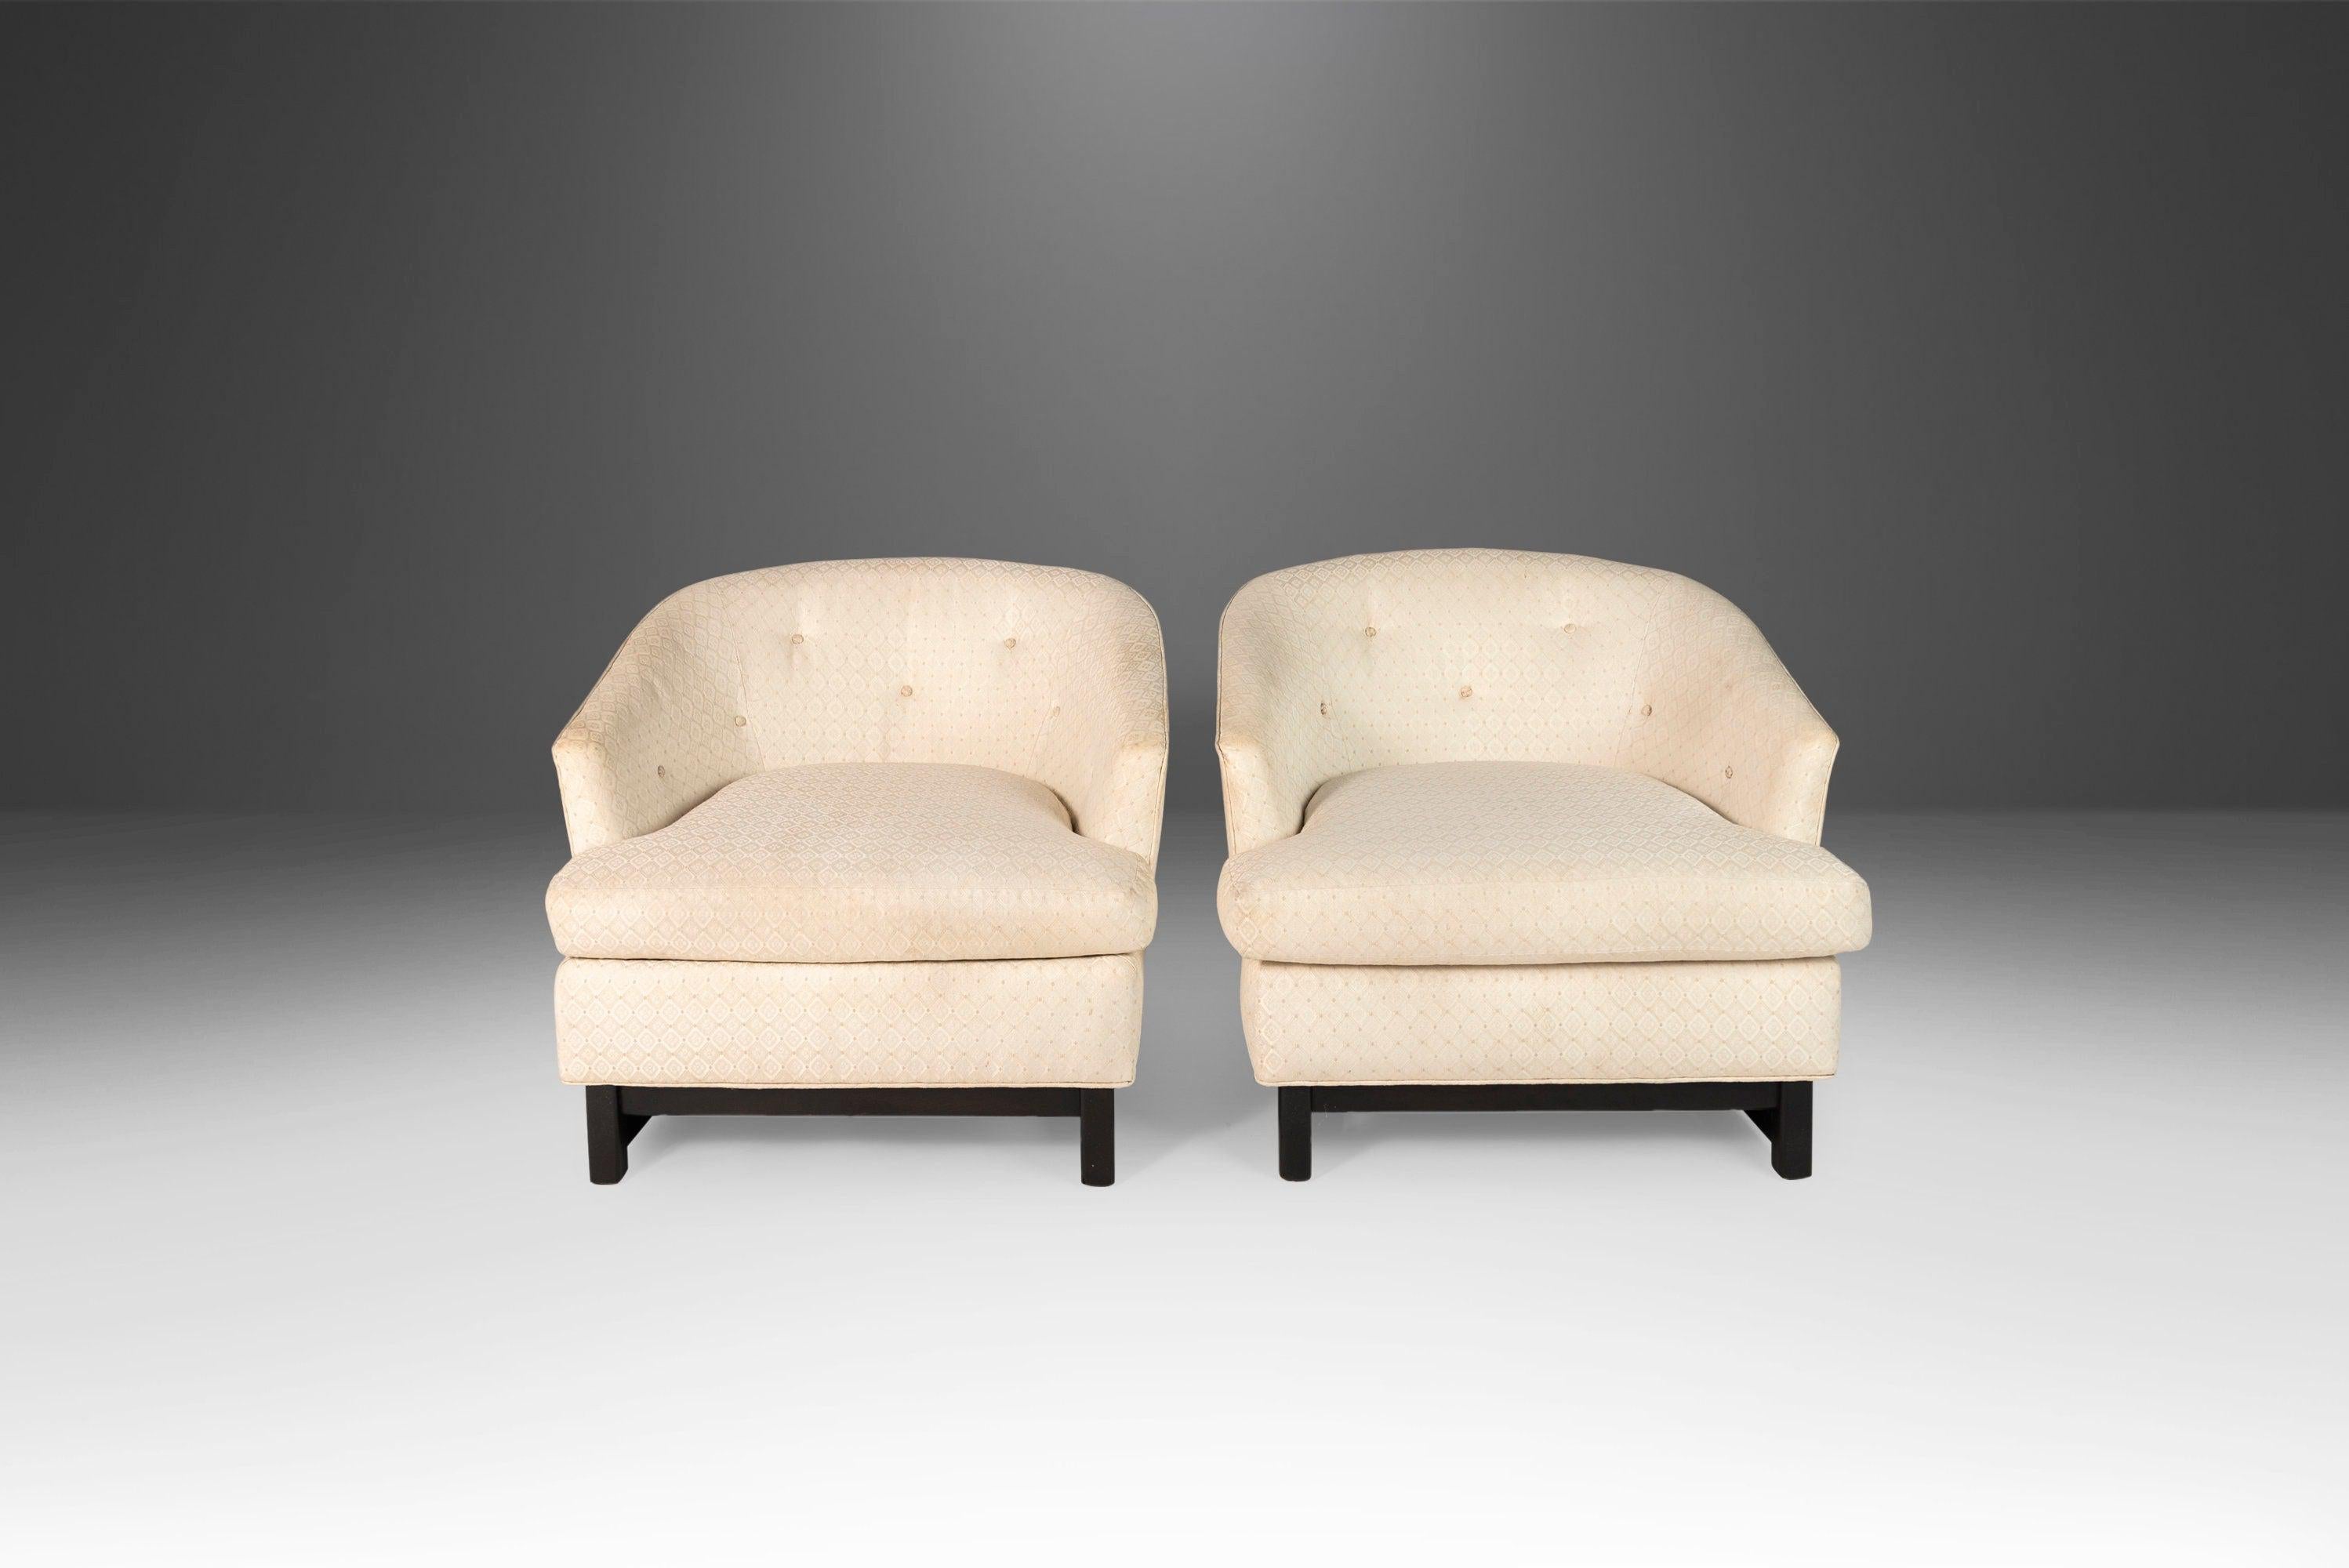 American Set of Two '2' Low Profile Barrel Chairs After Edward Wormley for Dunbar, 1960's For Sale